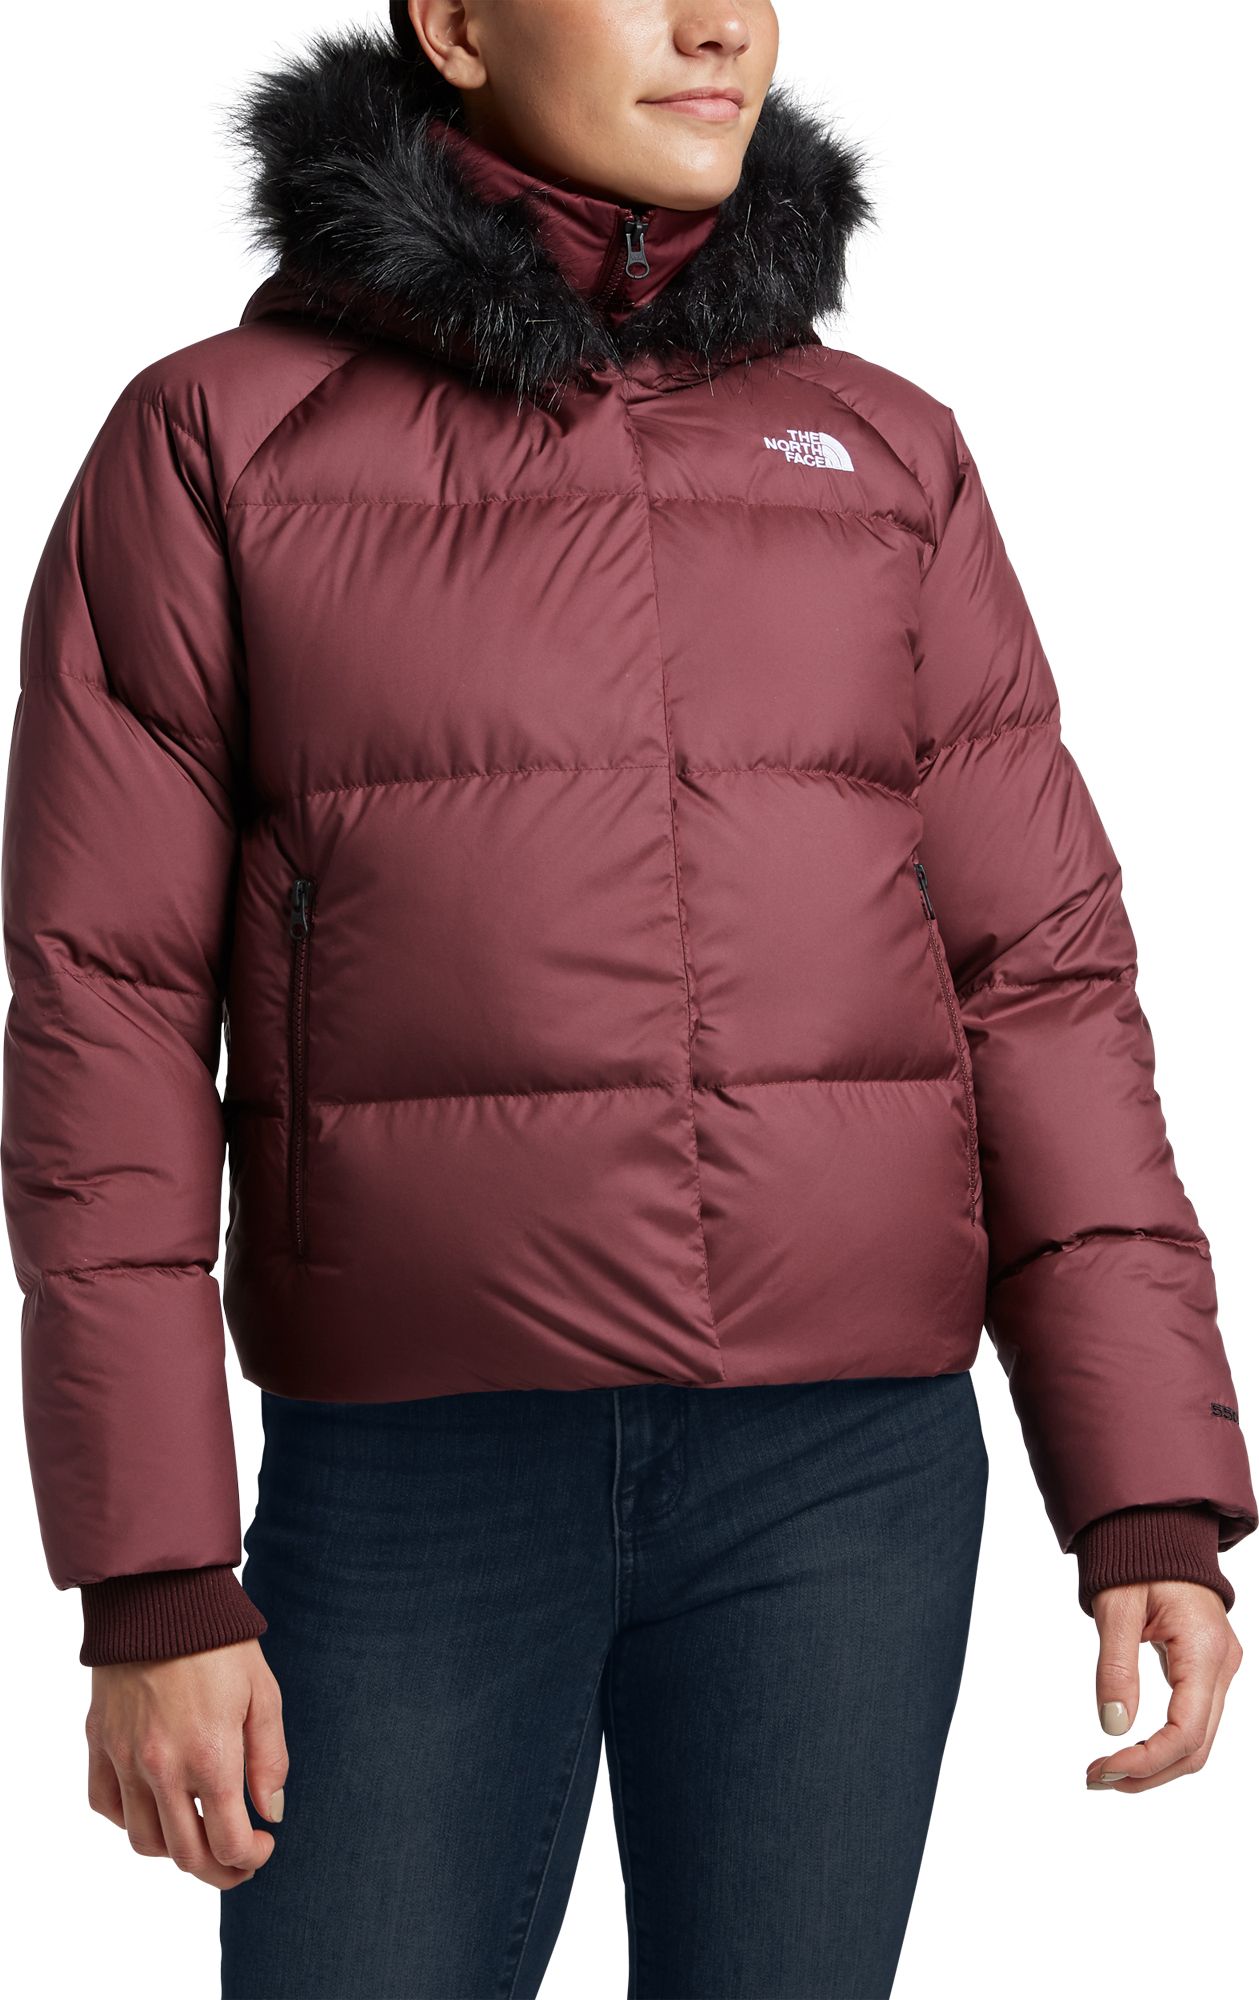 north face women's jacket with fur inside